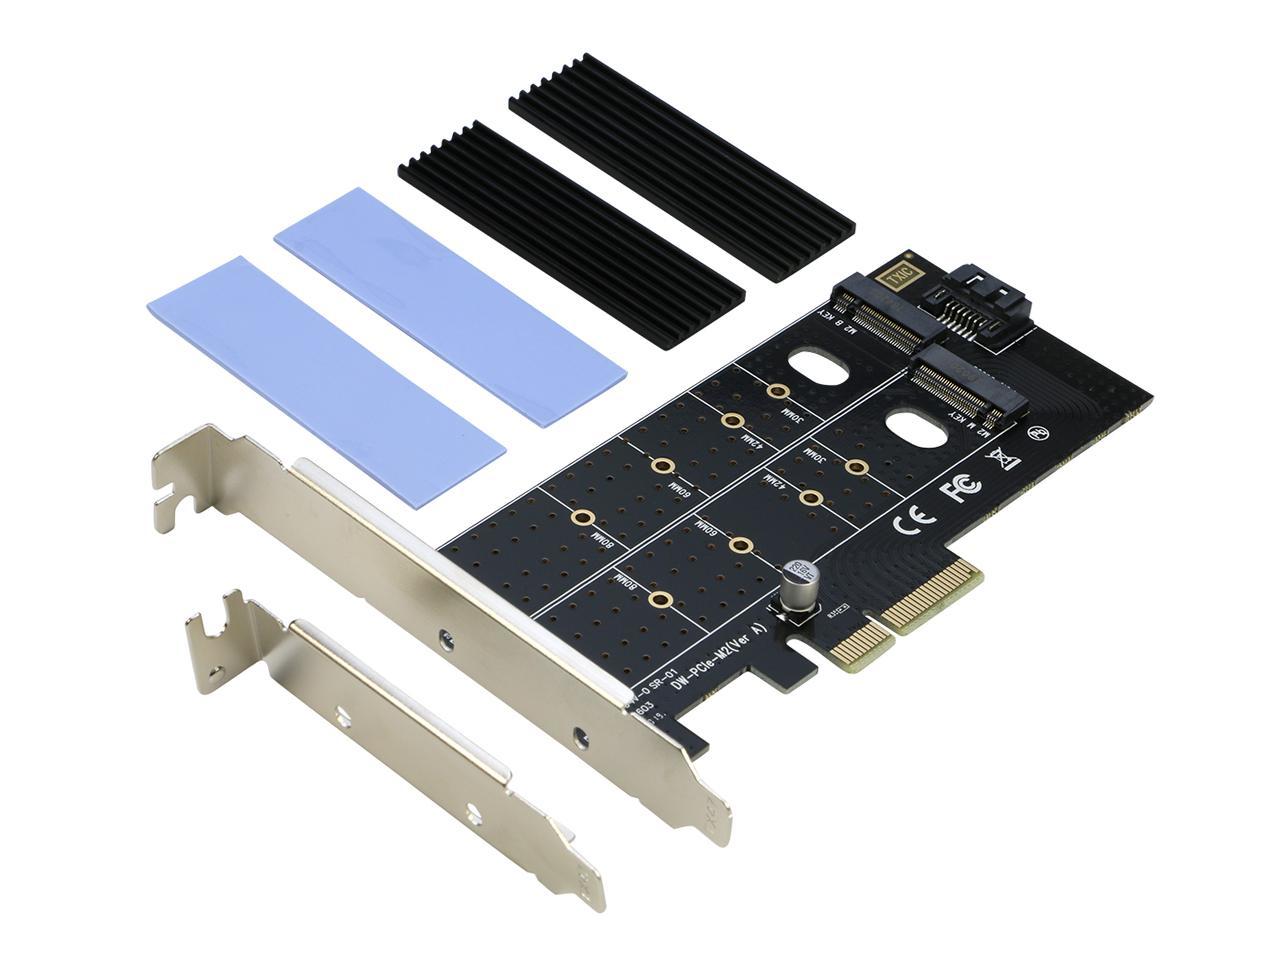 or SATA 22110 2280 2260 2242 2230 to PCI-e 3.0 x 4 Host Controller Expansion Card with Low Profile Bracket for Desktop PCI Express Slot m Key b Key Dual M.2 PCIe Adapter M2 SSD NVME 